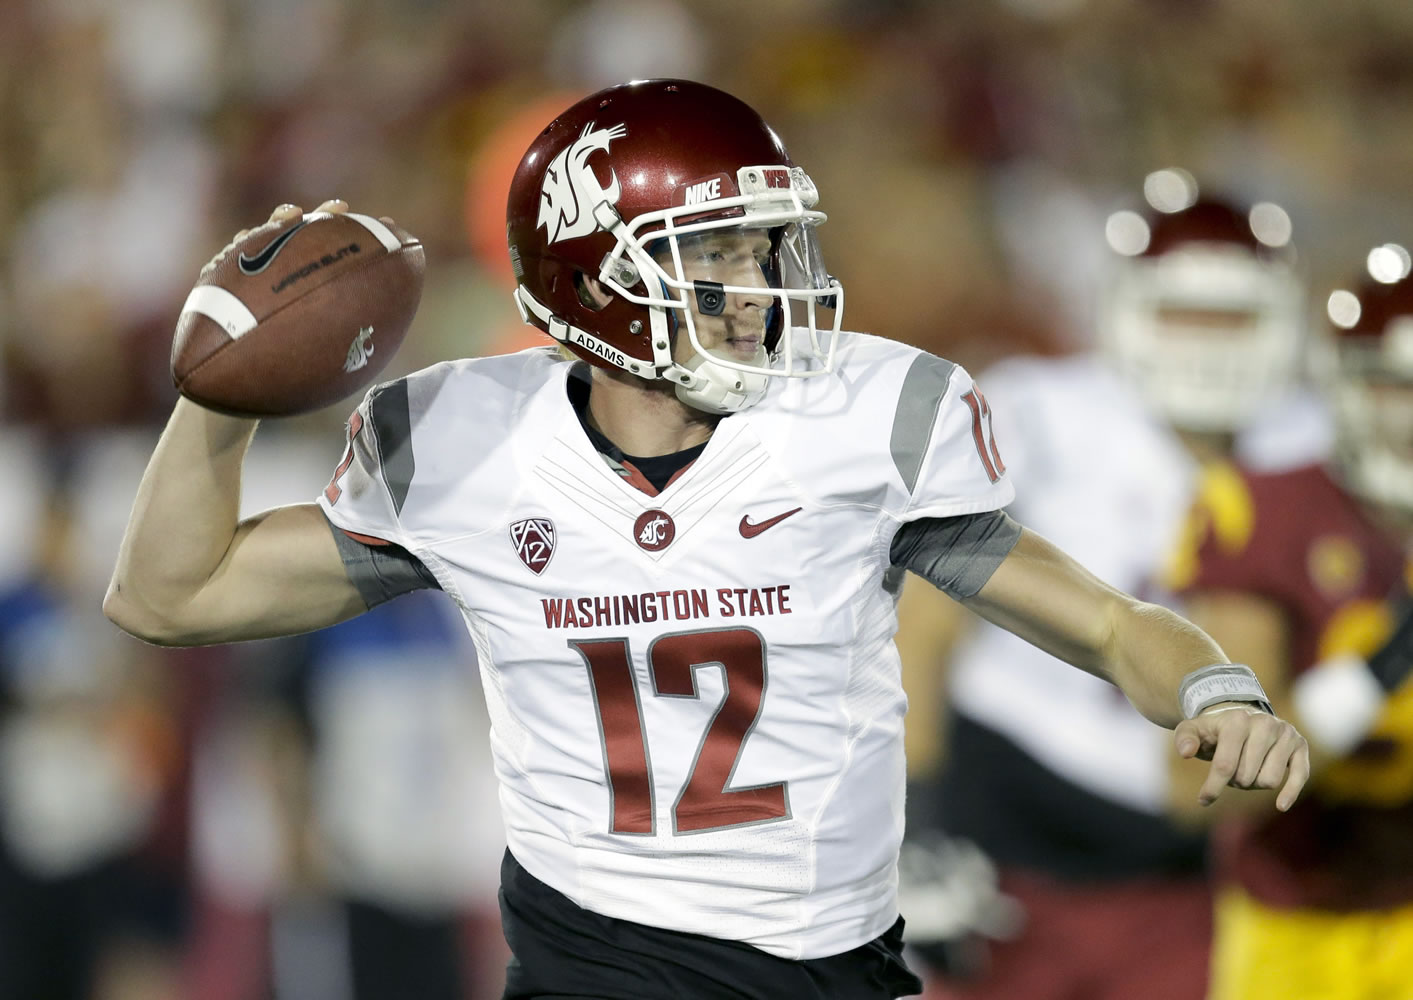 Washington State quarterback Connor Halliday passed for 215 yards and threw two interceptions against USC on Saturday night.